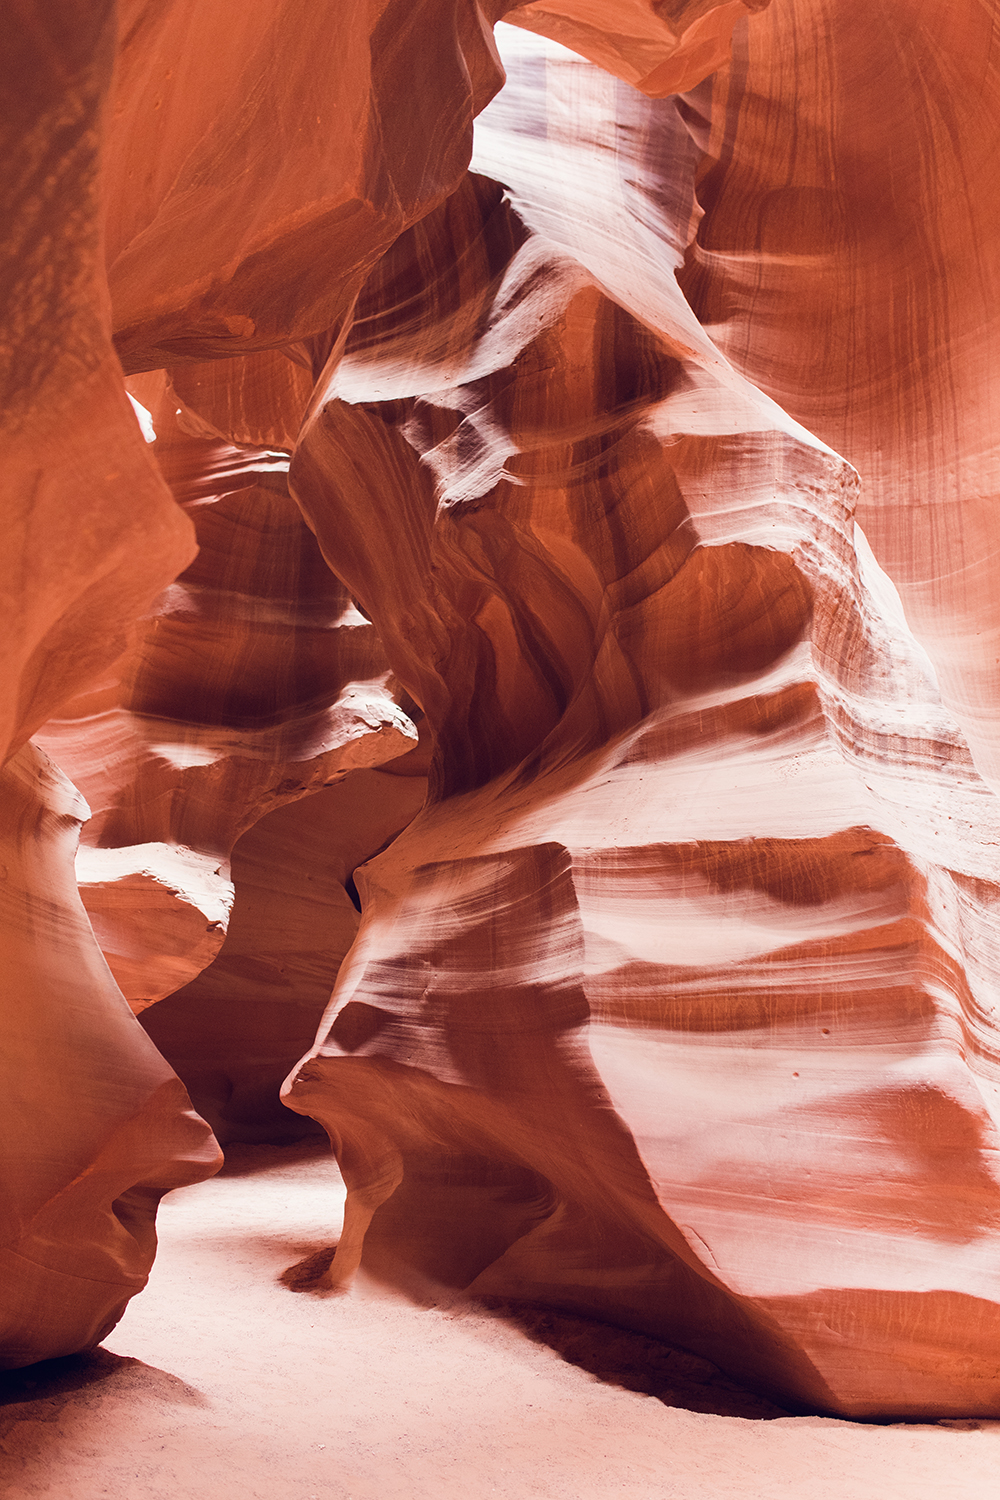 Antelope Canyon in Page, Arizona is in my top 10 favorite beautiful places in the US to visit.